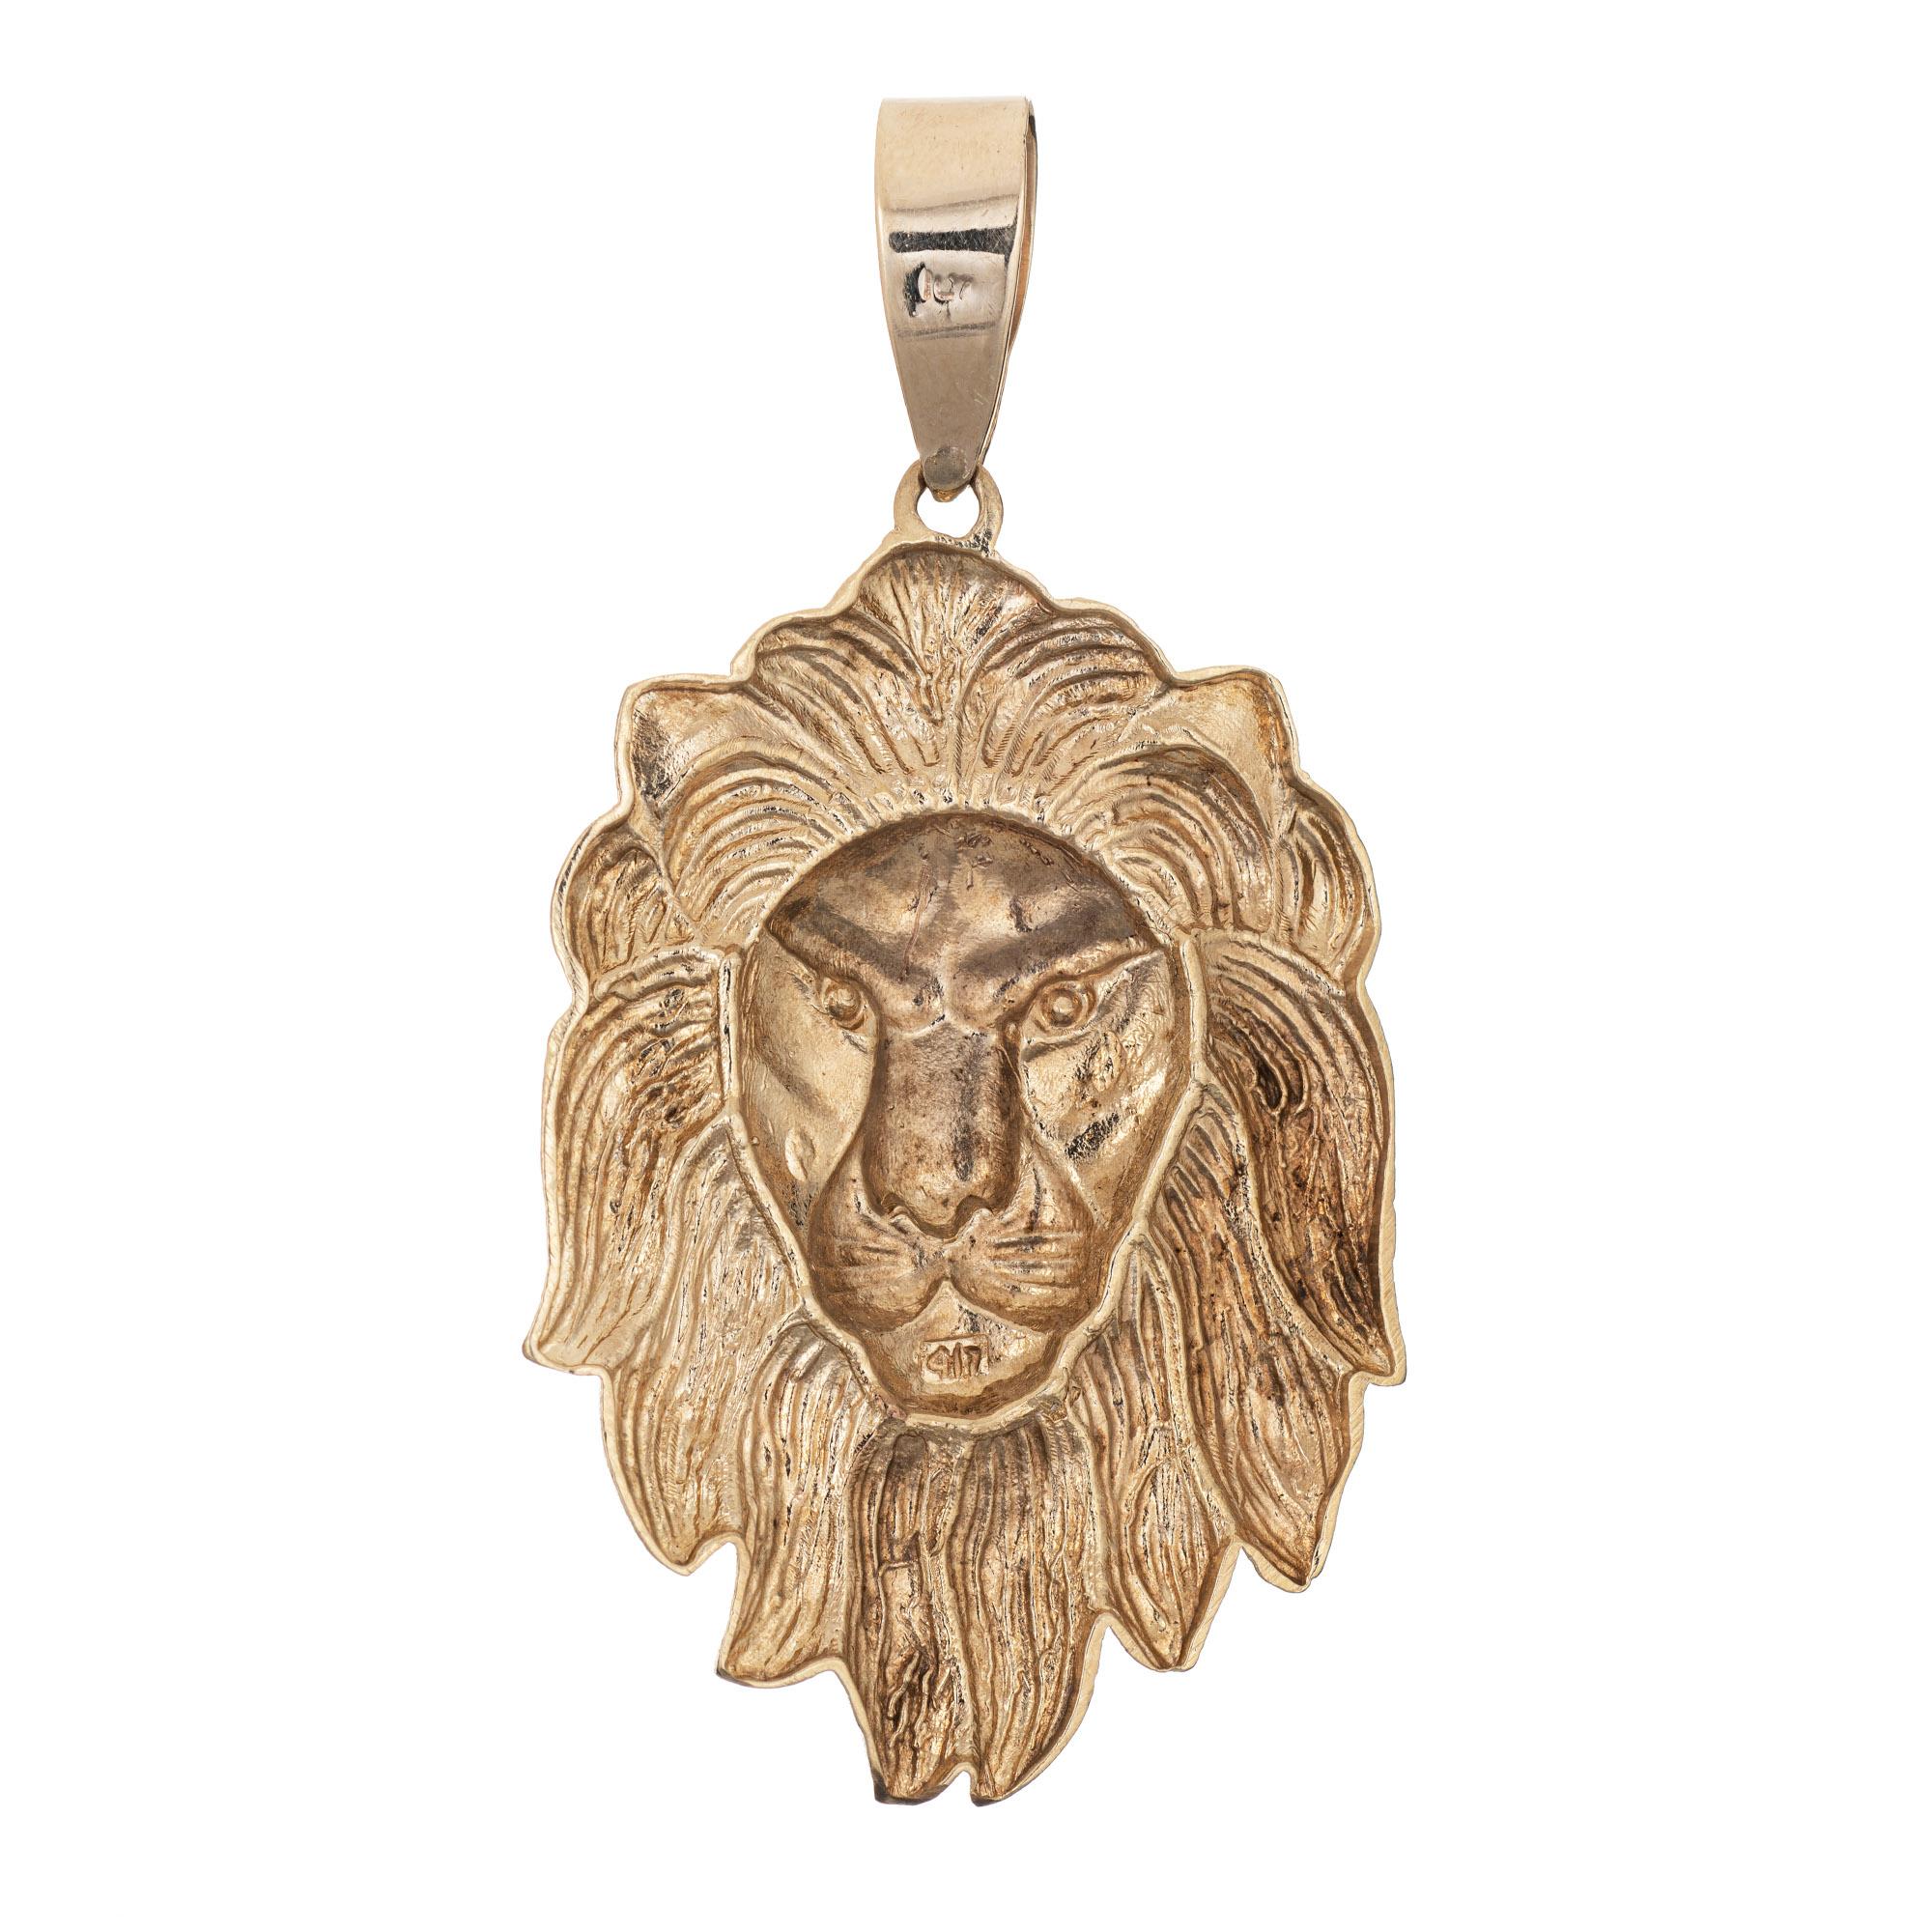 Finely detailed large Lion pendant crafted in 10k yellow gold (circa 1980s to 1990s).  

The large pendant (2 1/2 inches) features the face of a Lion. The elaborate pendant has a lightweight feel with a substantial look. The pendant is great worn